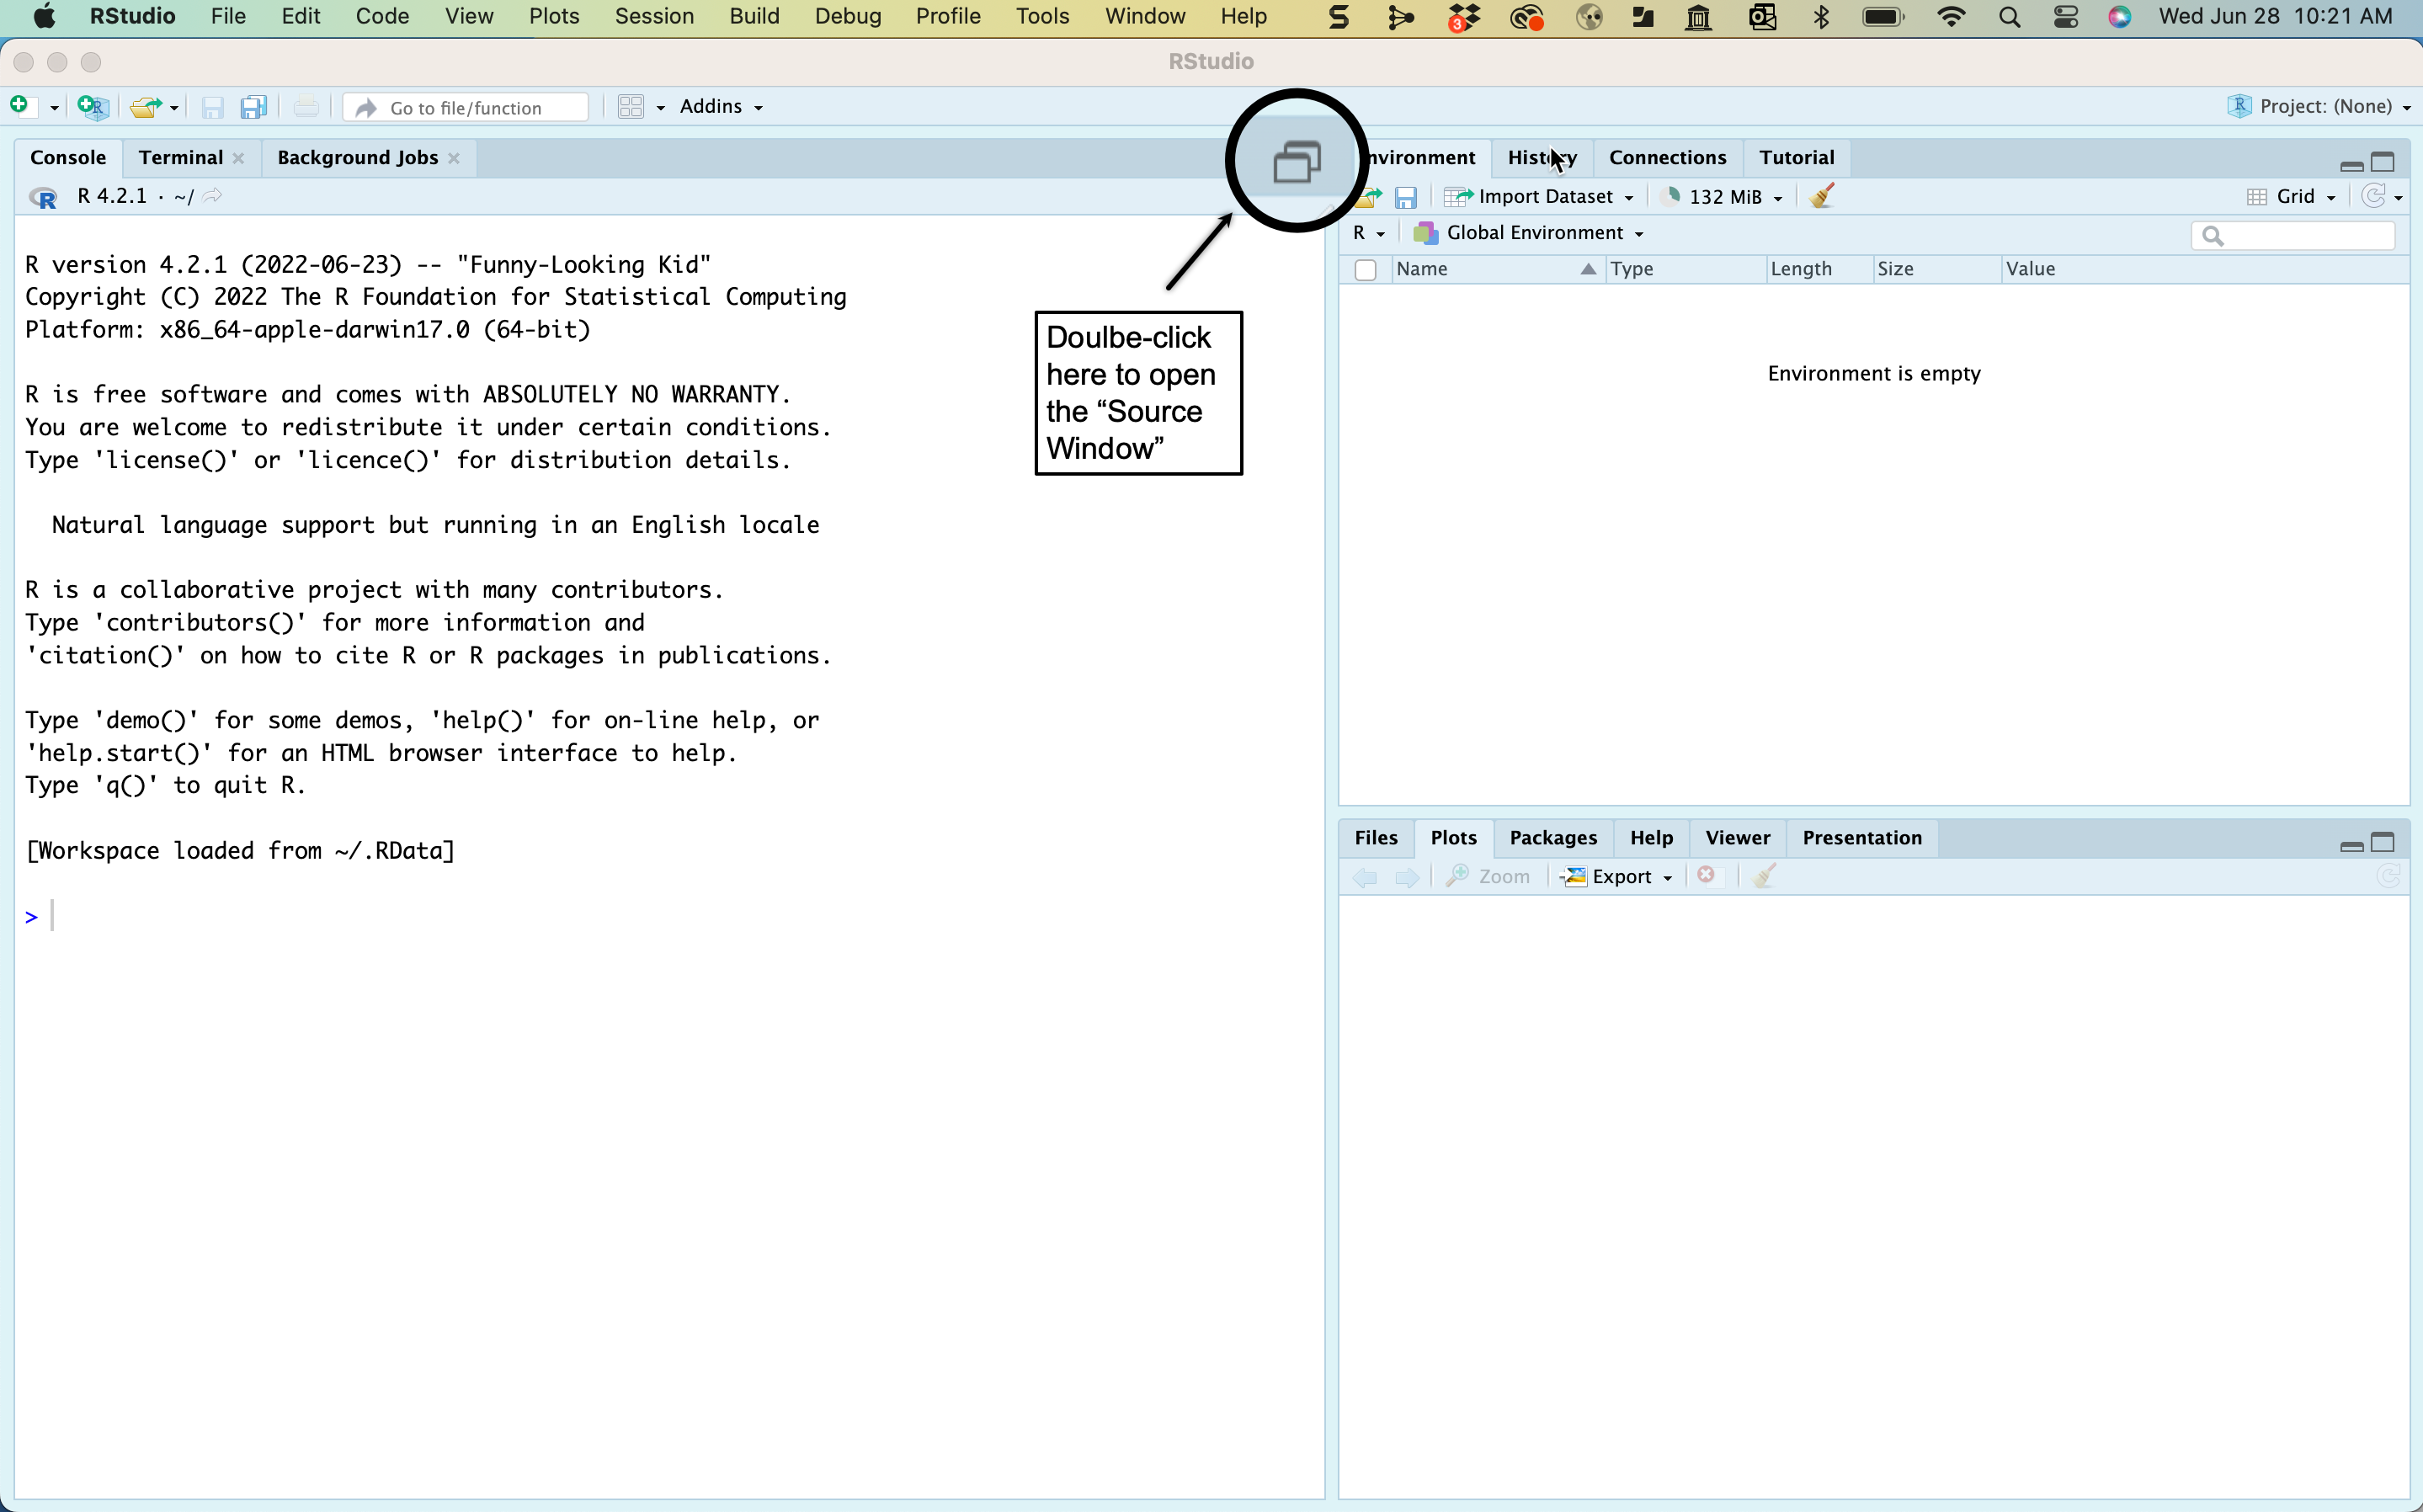 An Annoted Display of Initial RStudio Windows